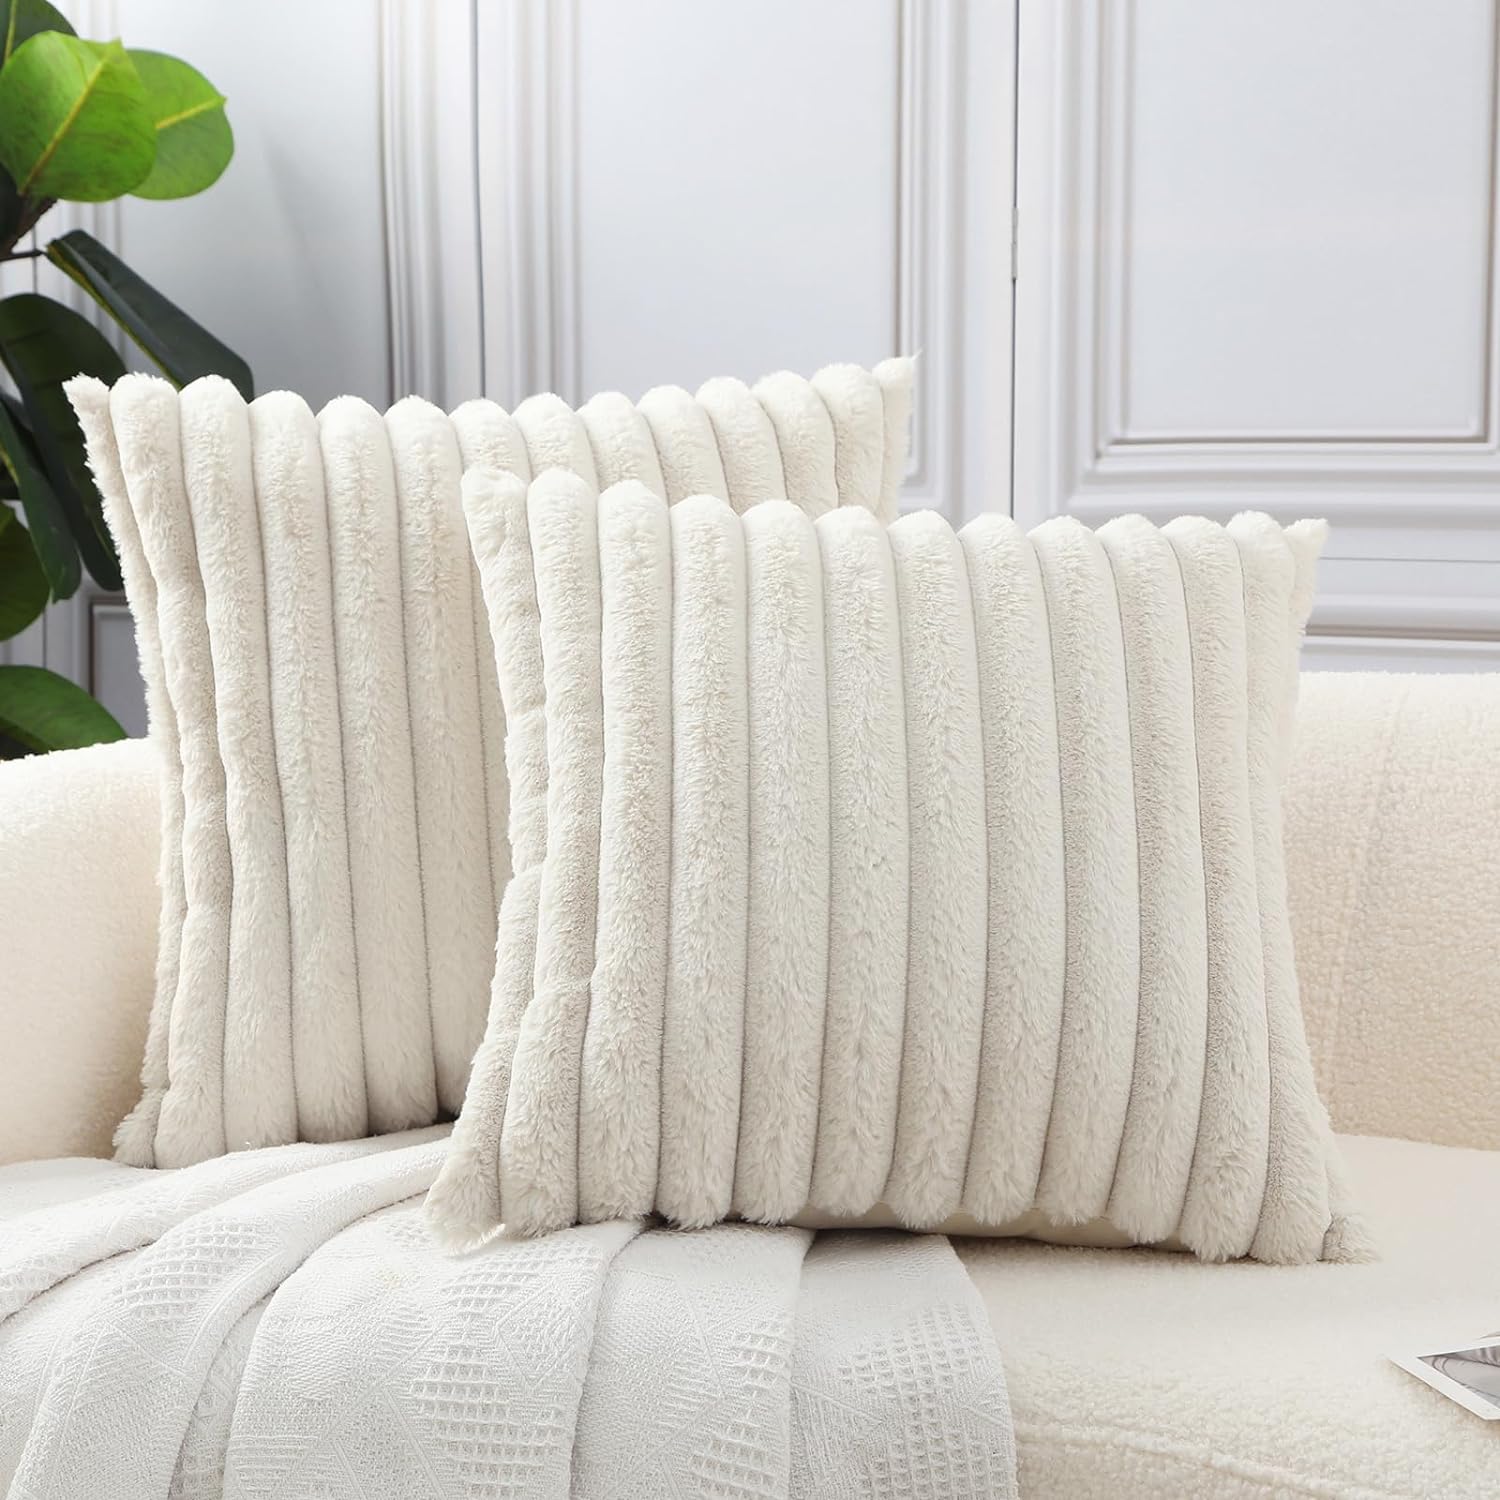 HPUK Faux Fur Plush Striped Throw Pillow Covers 18x18 Inch, Decorative Fluffy Couch Pillow Covers for Living Room, Accent Cozy and Fuzzy Pillow Covers for Couch, Sofa, and Bedroom(Cream White)